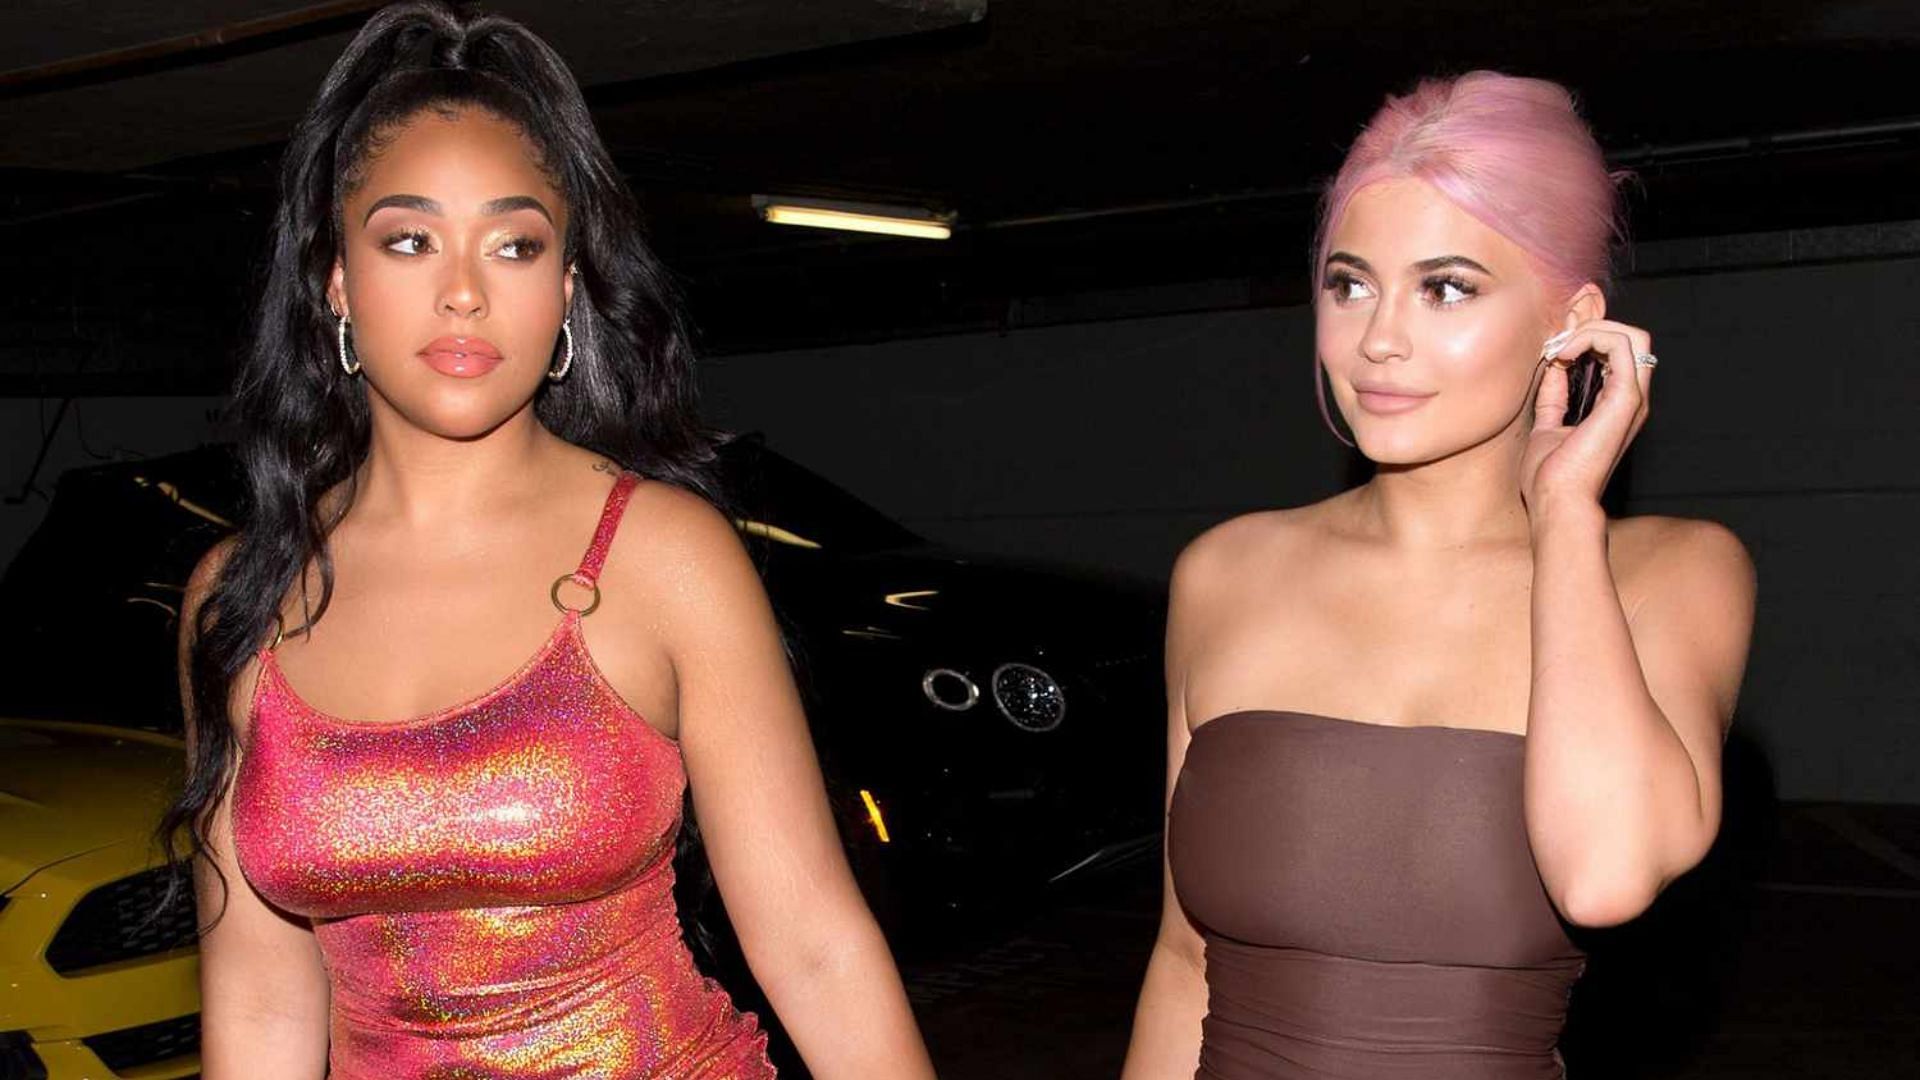 Kylie Jenner and Jordyn Woods - a timeline of their friendship